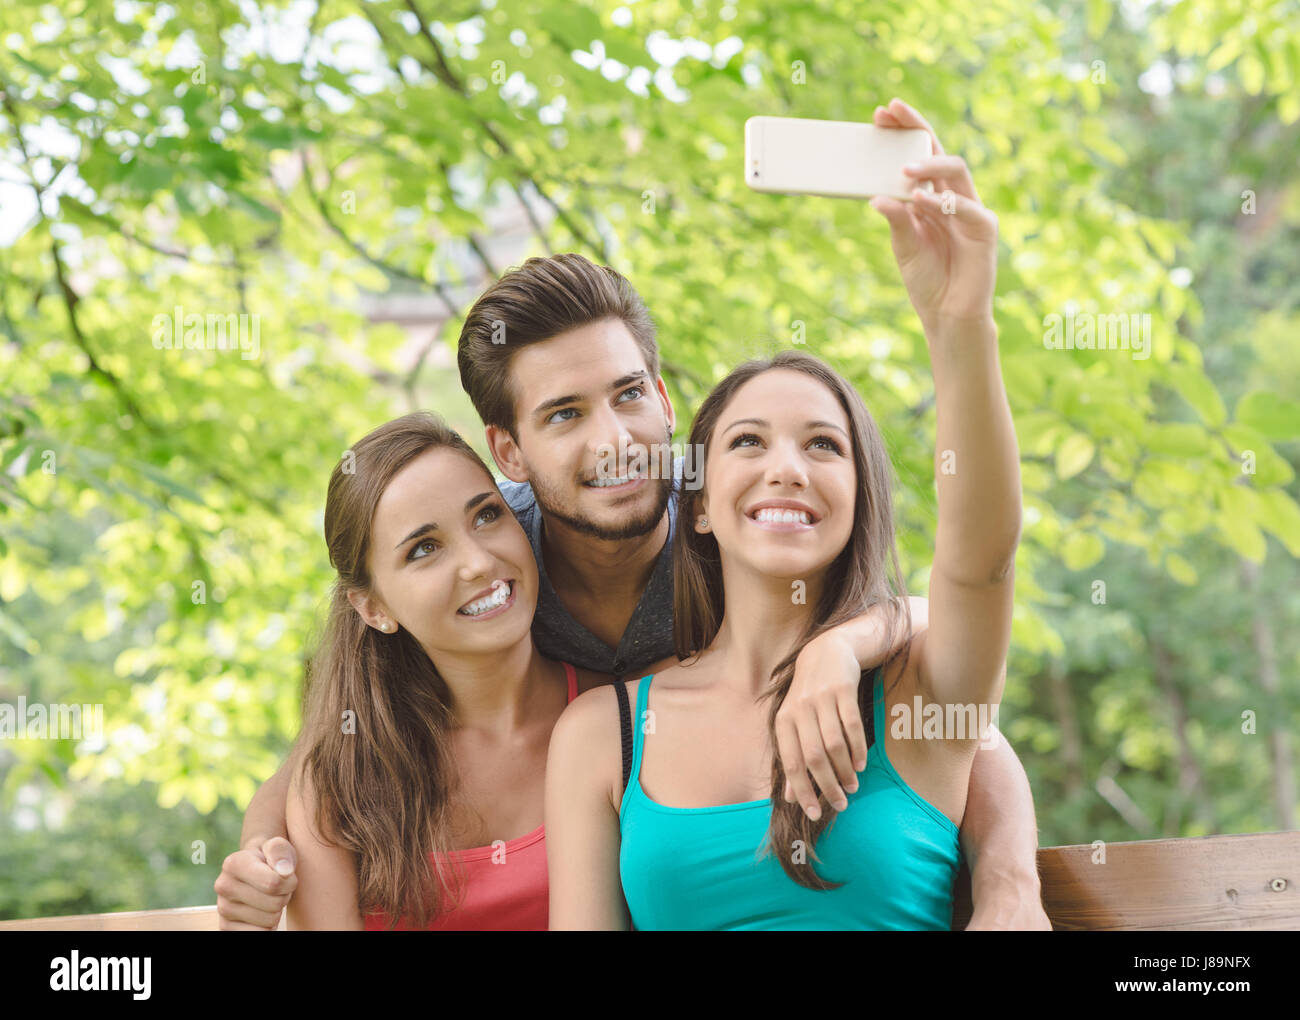 Cheerful smiling teens at the park sitting on a bench and taking selfies using a smart phone Stock Photo